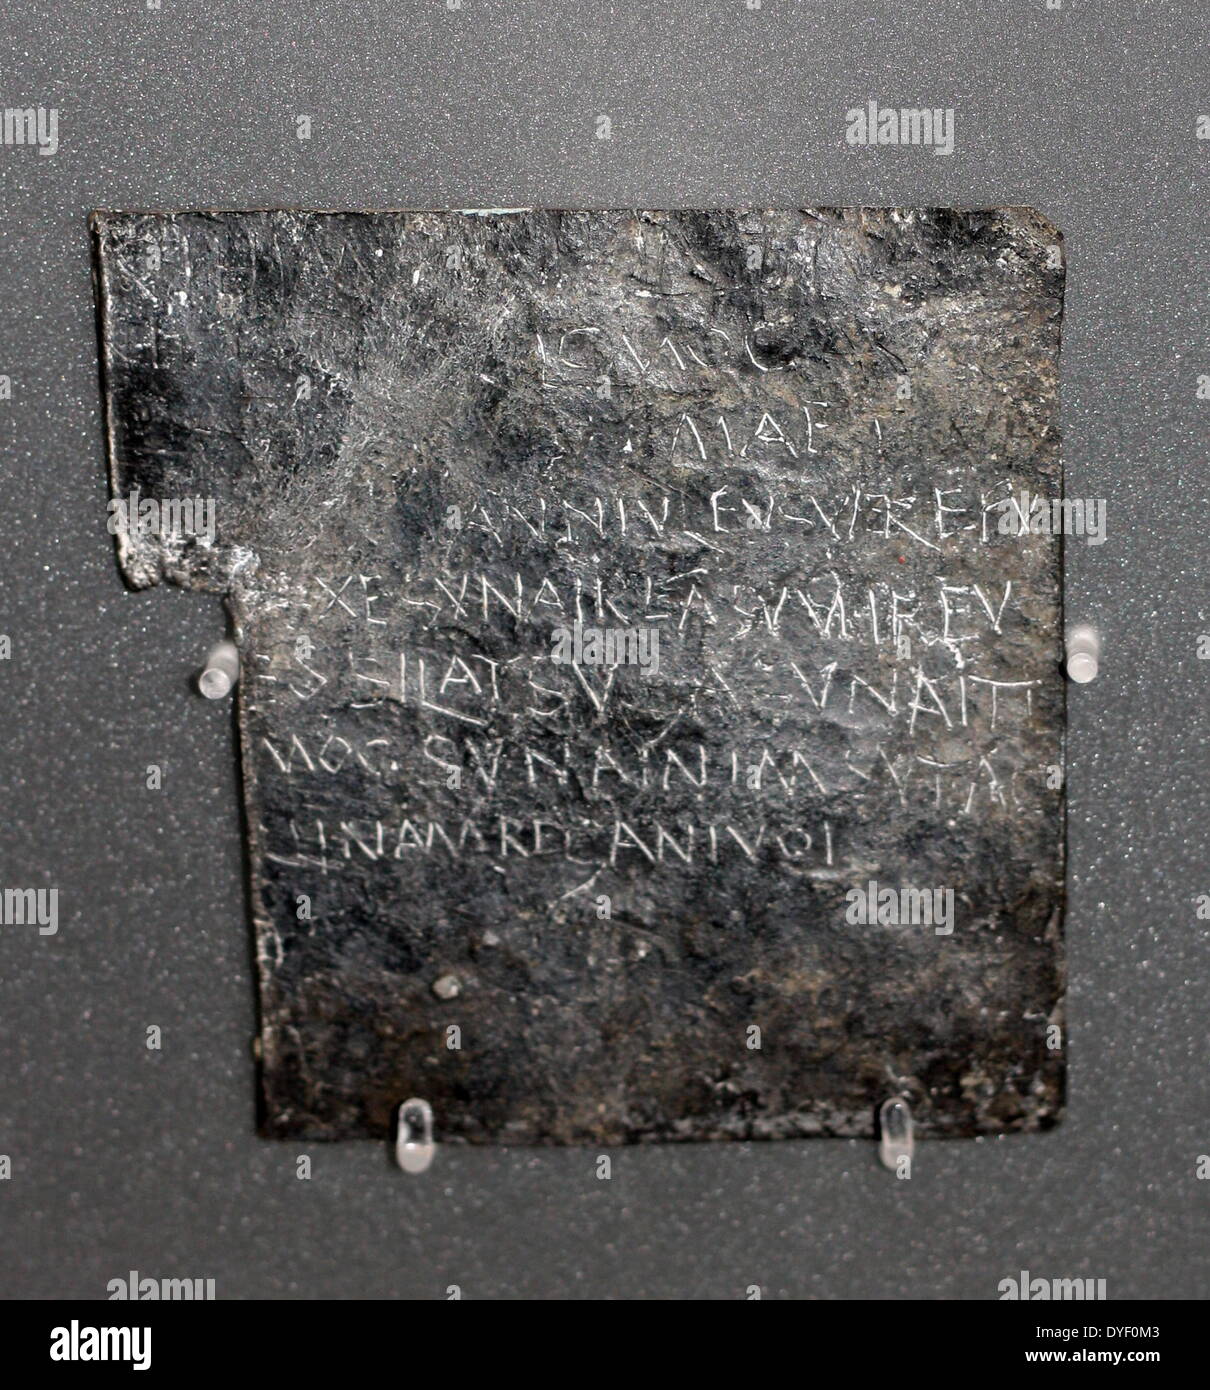 Text scratched into metal complaining of the theft of 'Vilbia' (Thought to be a woman, possibly a slave). Known as a 'curse' this text lists possible culprits by name. Circa 1st-3rd century AD. Stock Photo